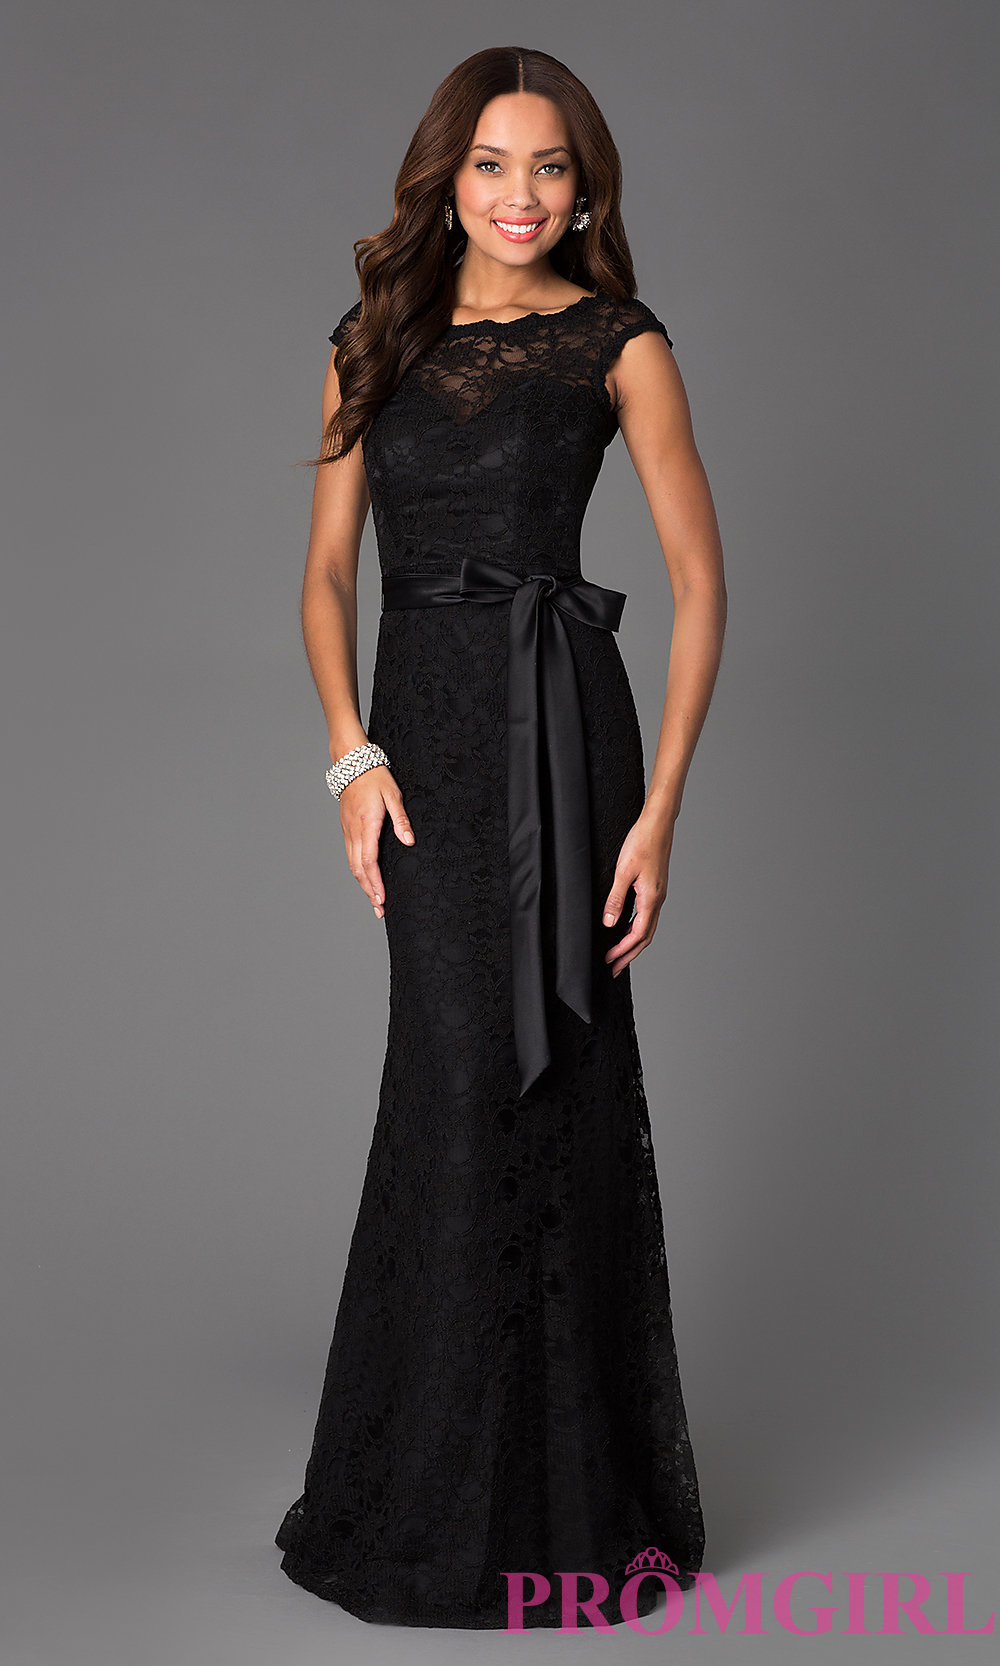 black evening dresses hover to zoom YBDWIAL